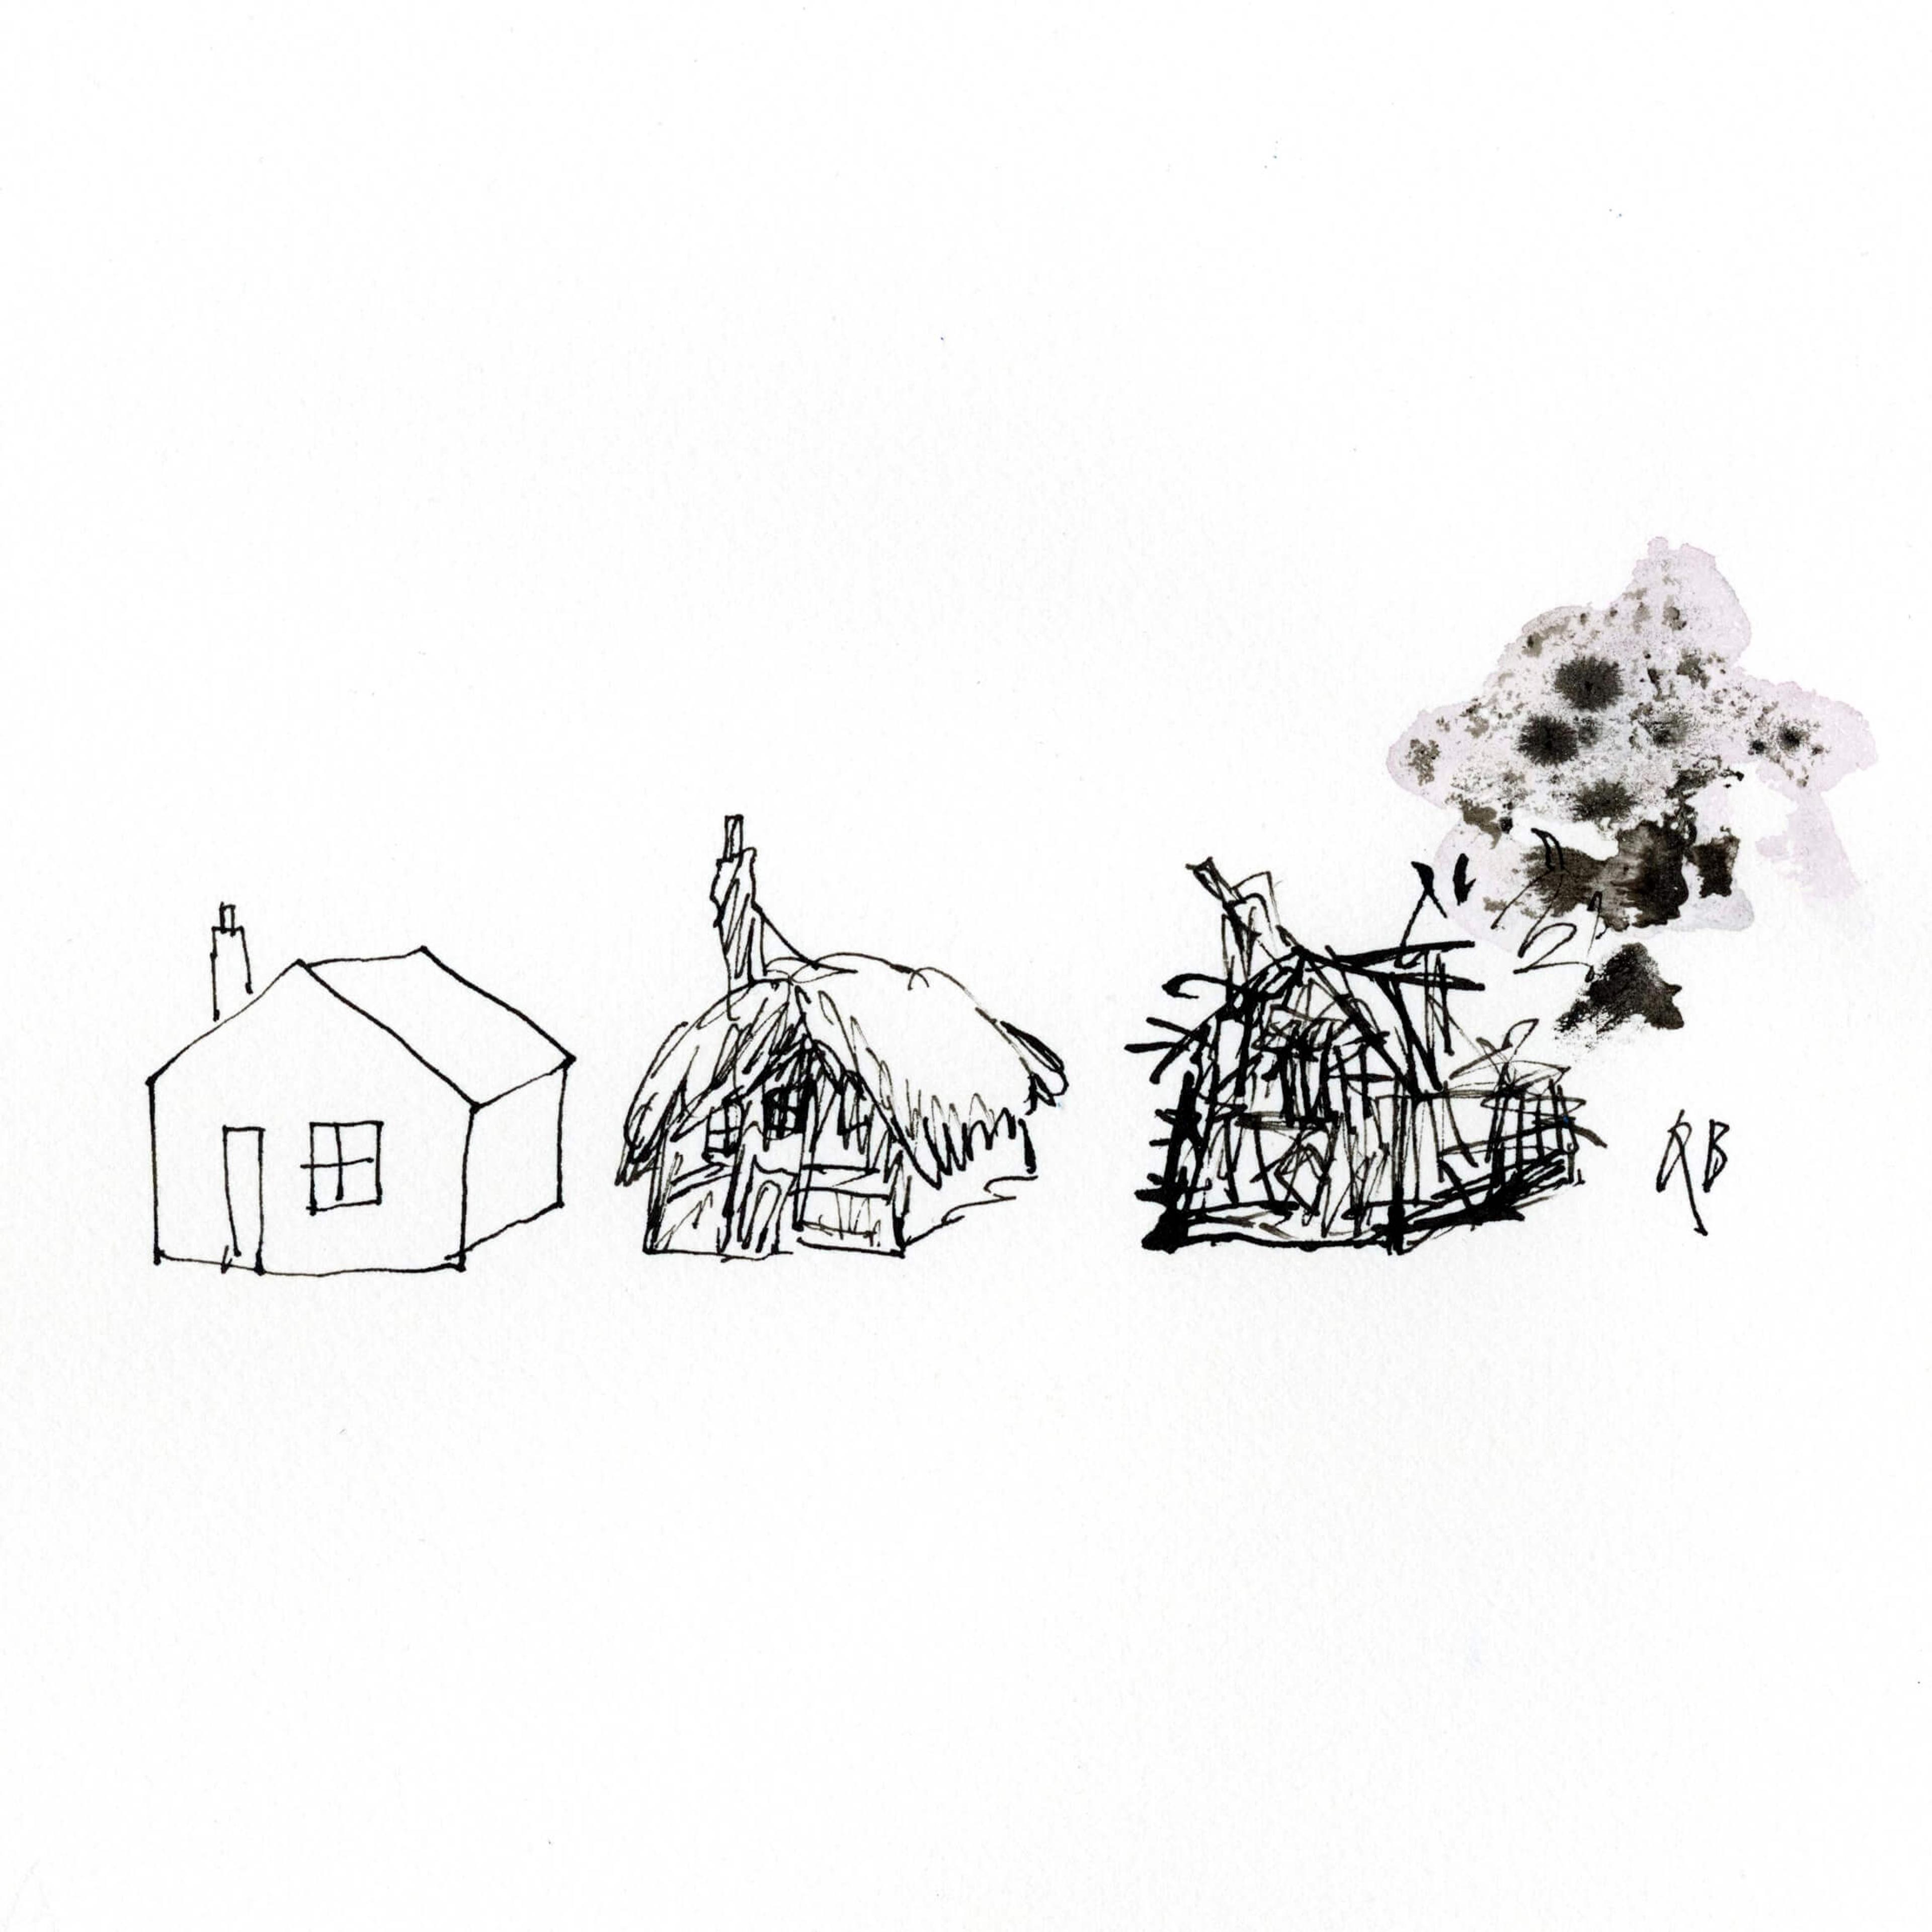 A Quentin Blake illustration featuring three houses drawn using ink